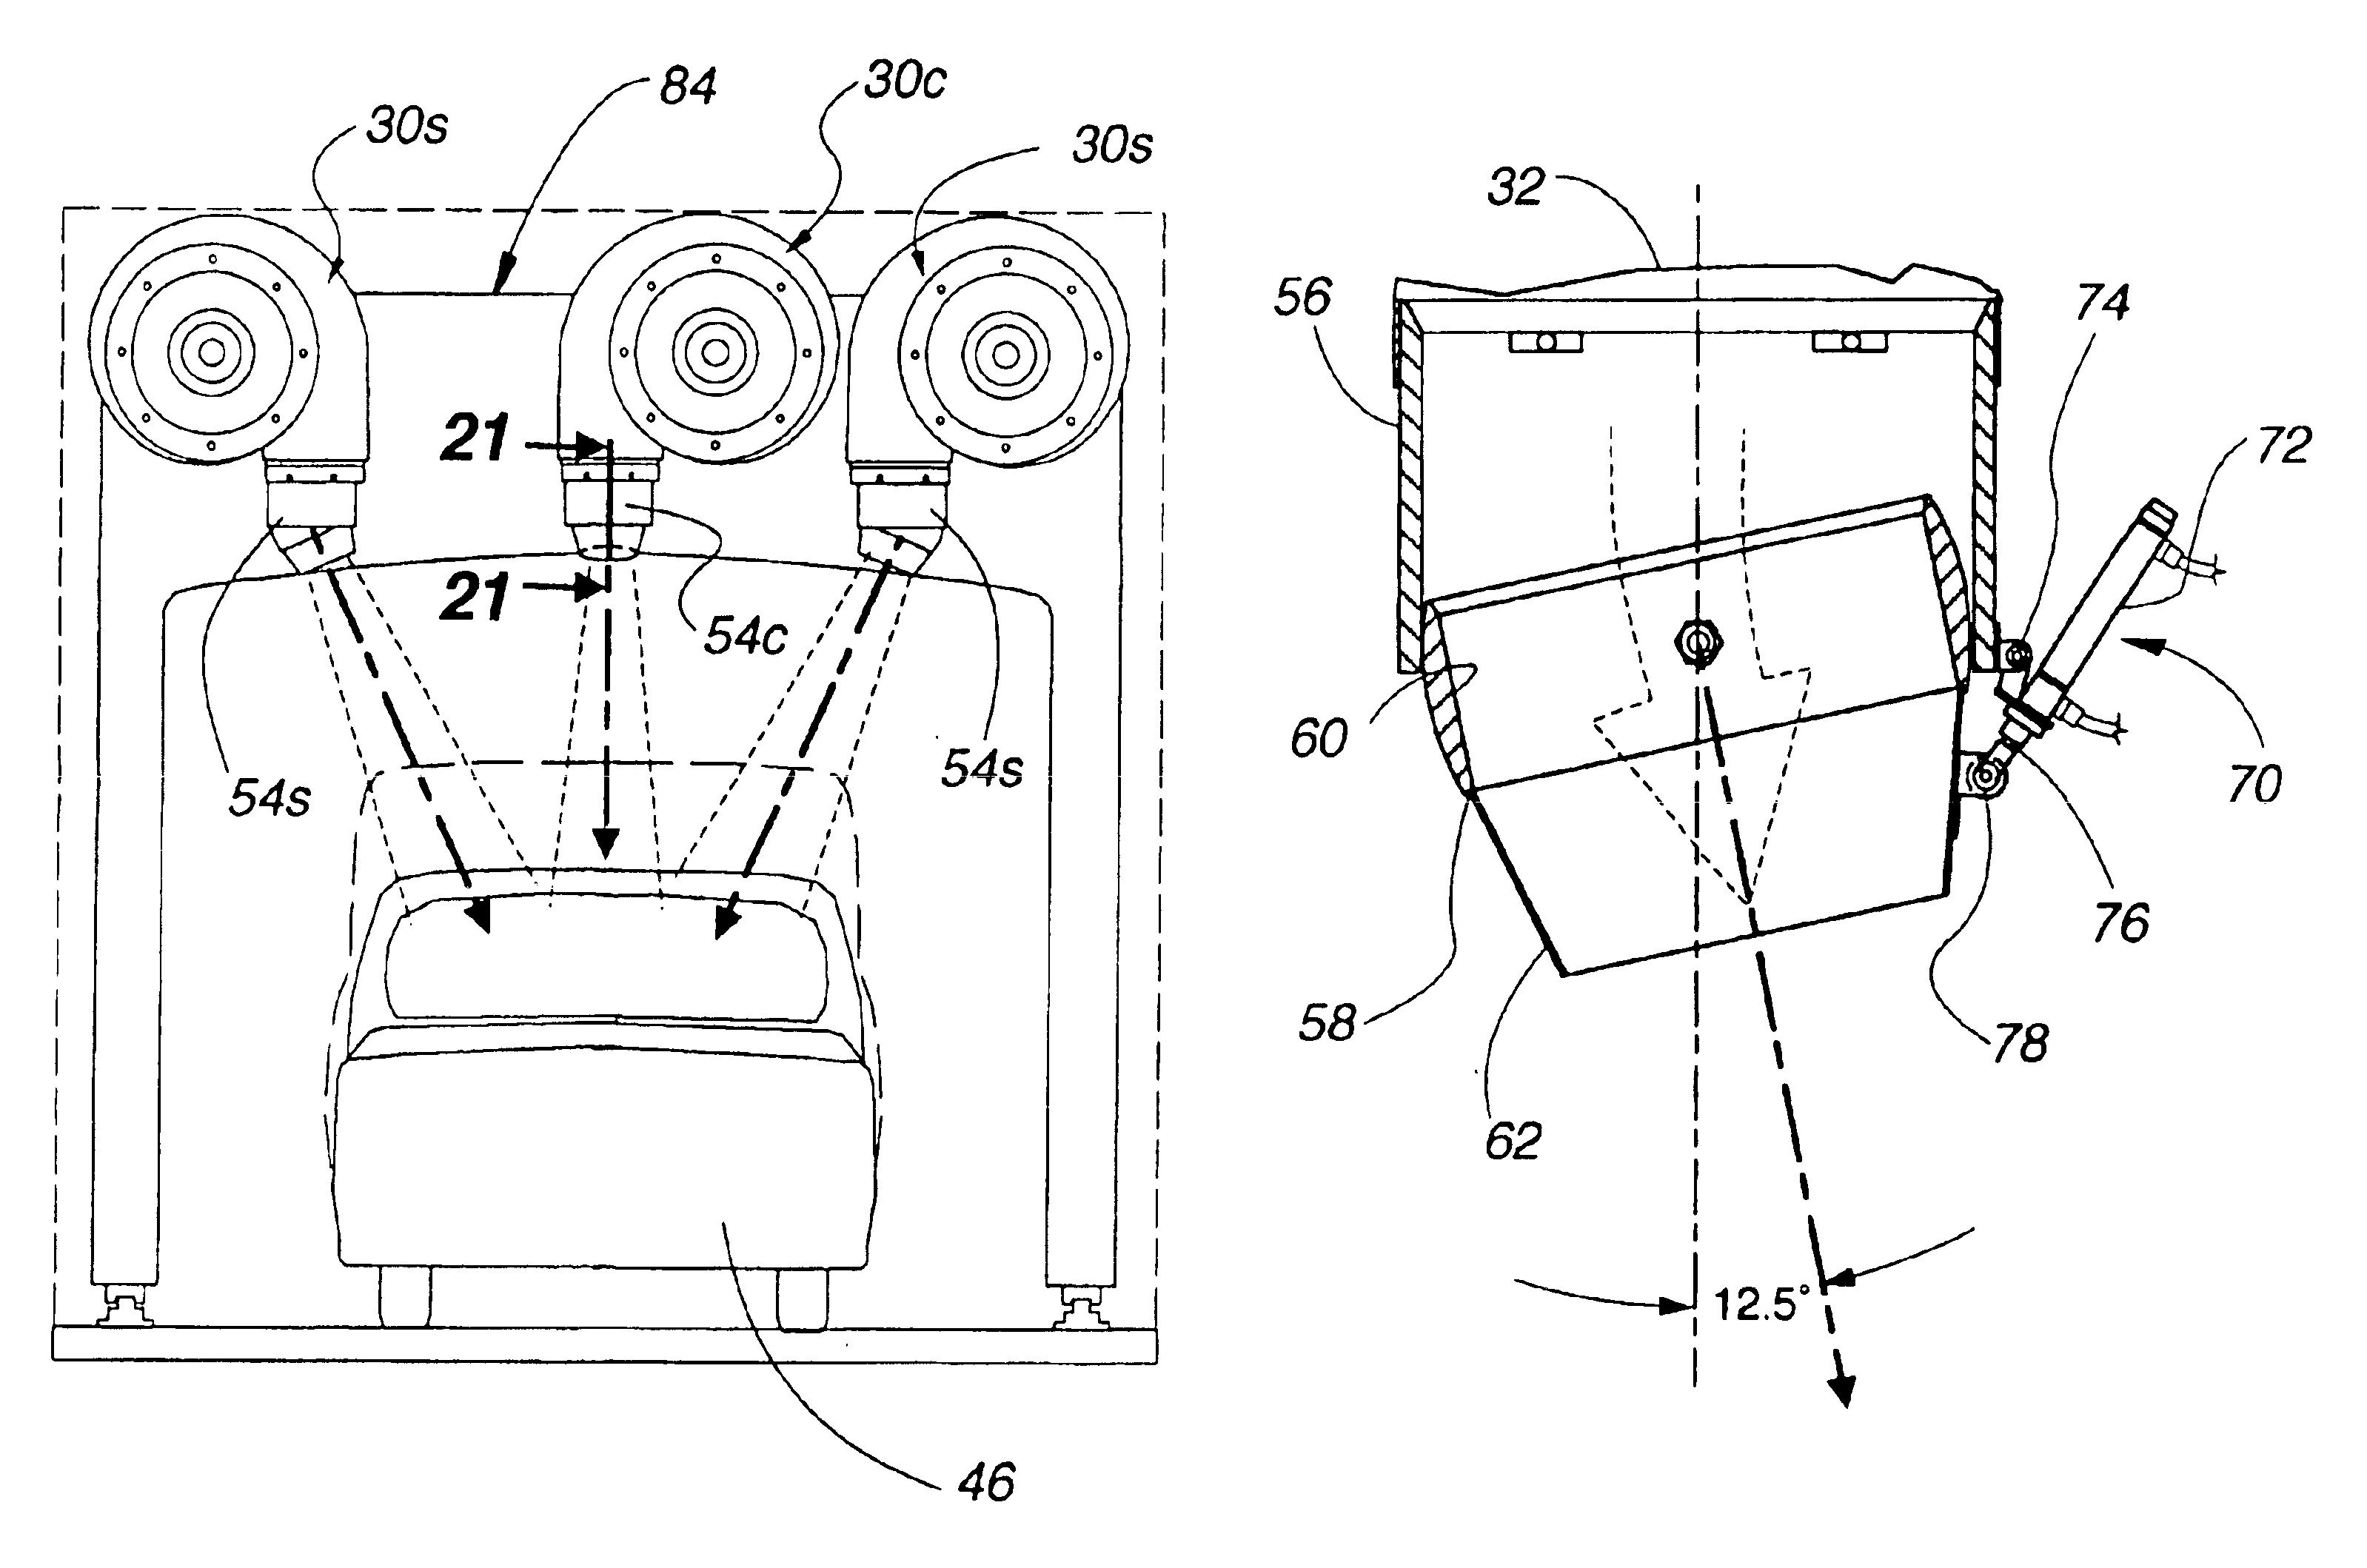 Pivotal dryer nozzle for car wash equipment and methods for drying vehicles